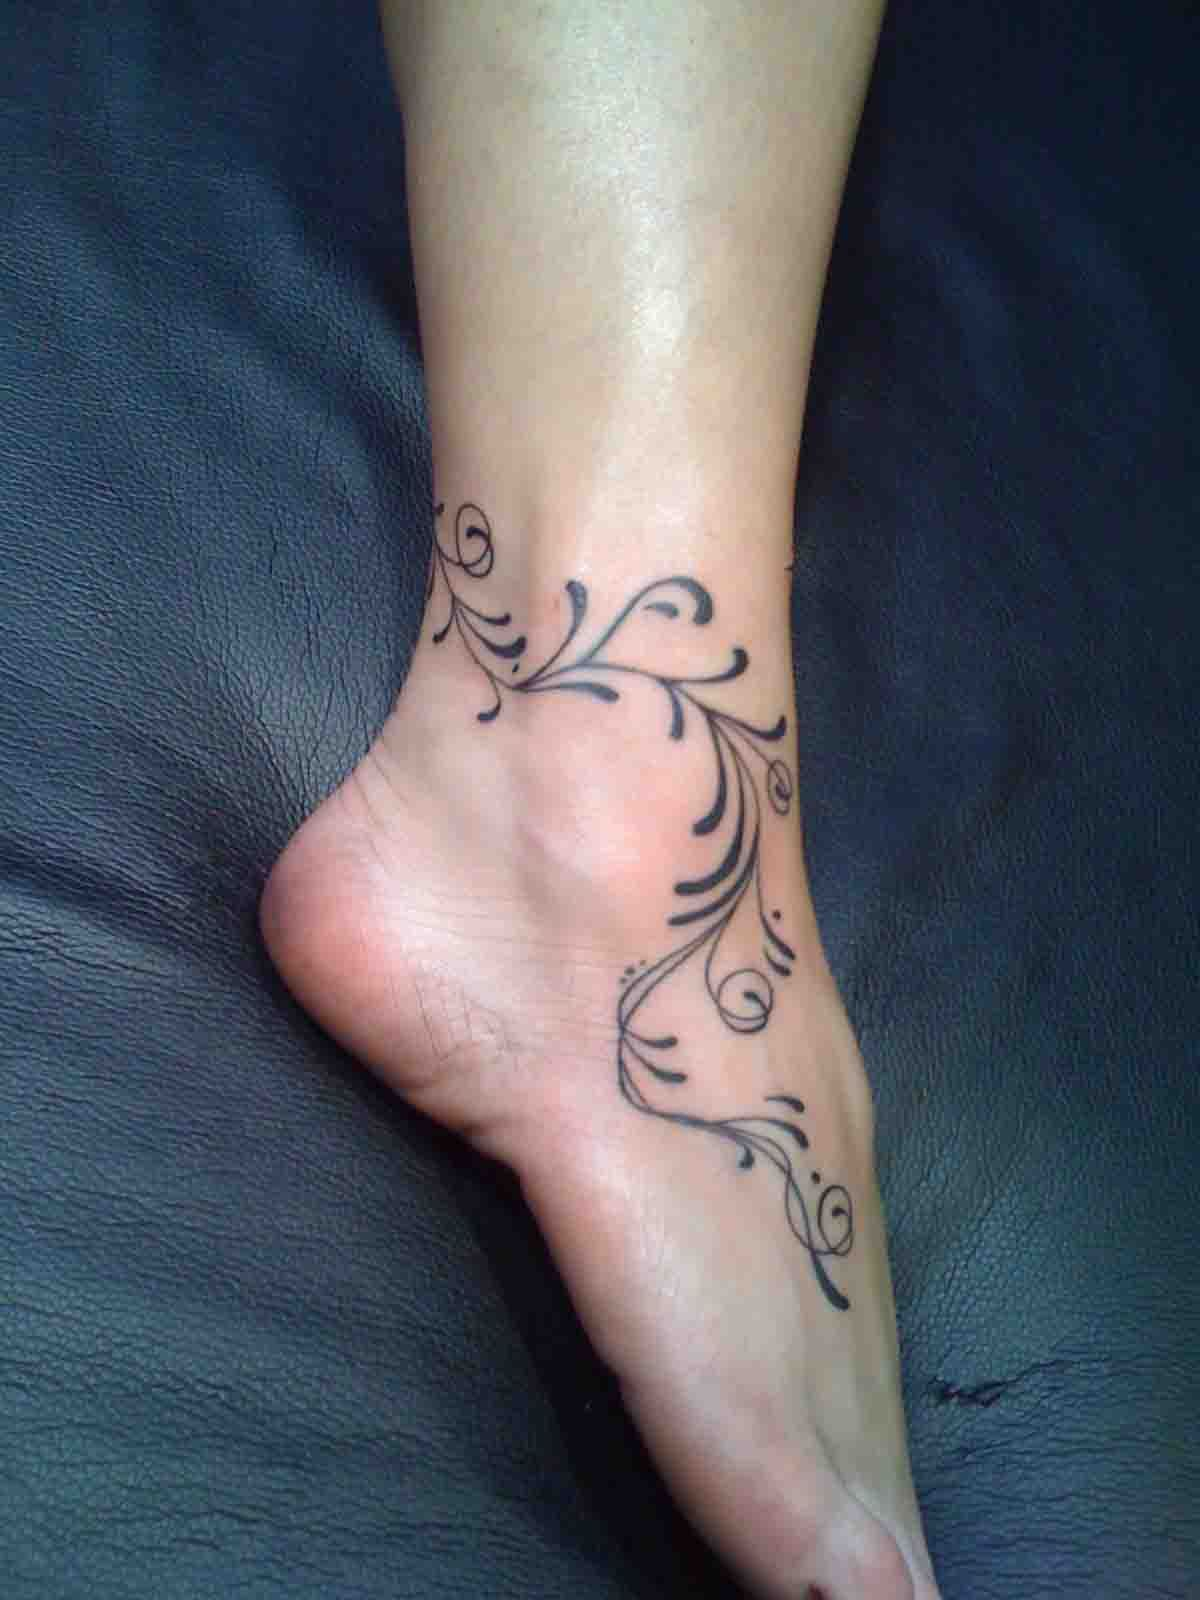 20 Amazing Ankle Tattoos Design Ideas For Women Tattoos Ankle pertaining to sizing 1200 X 1600